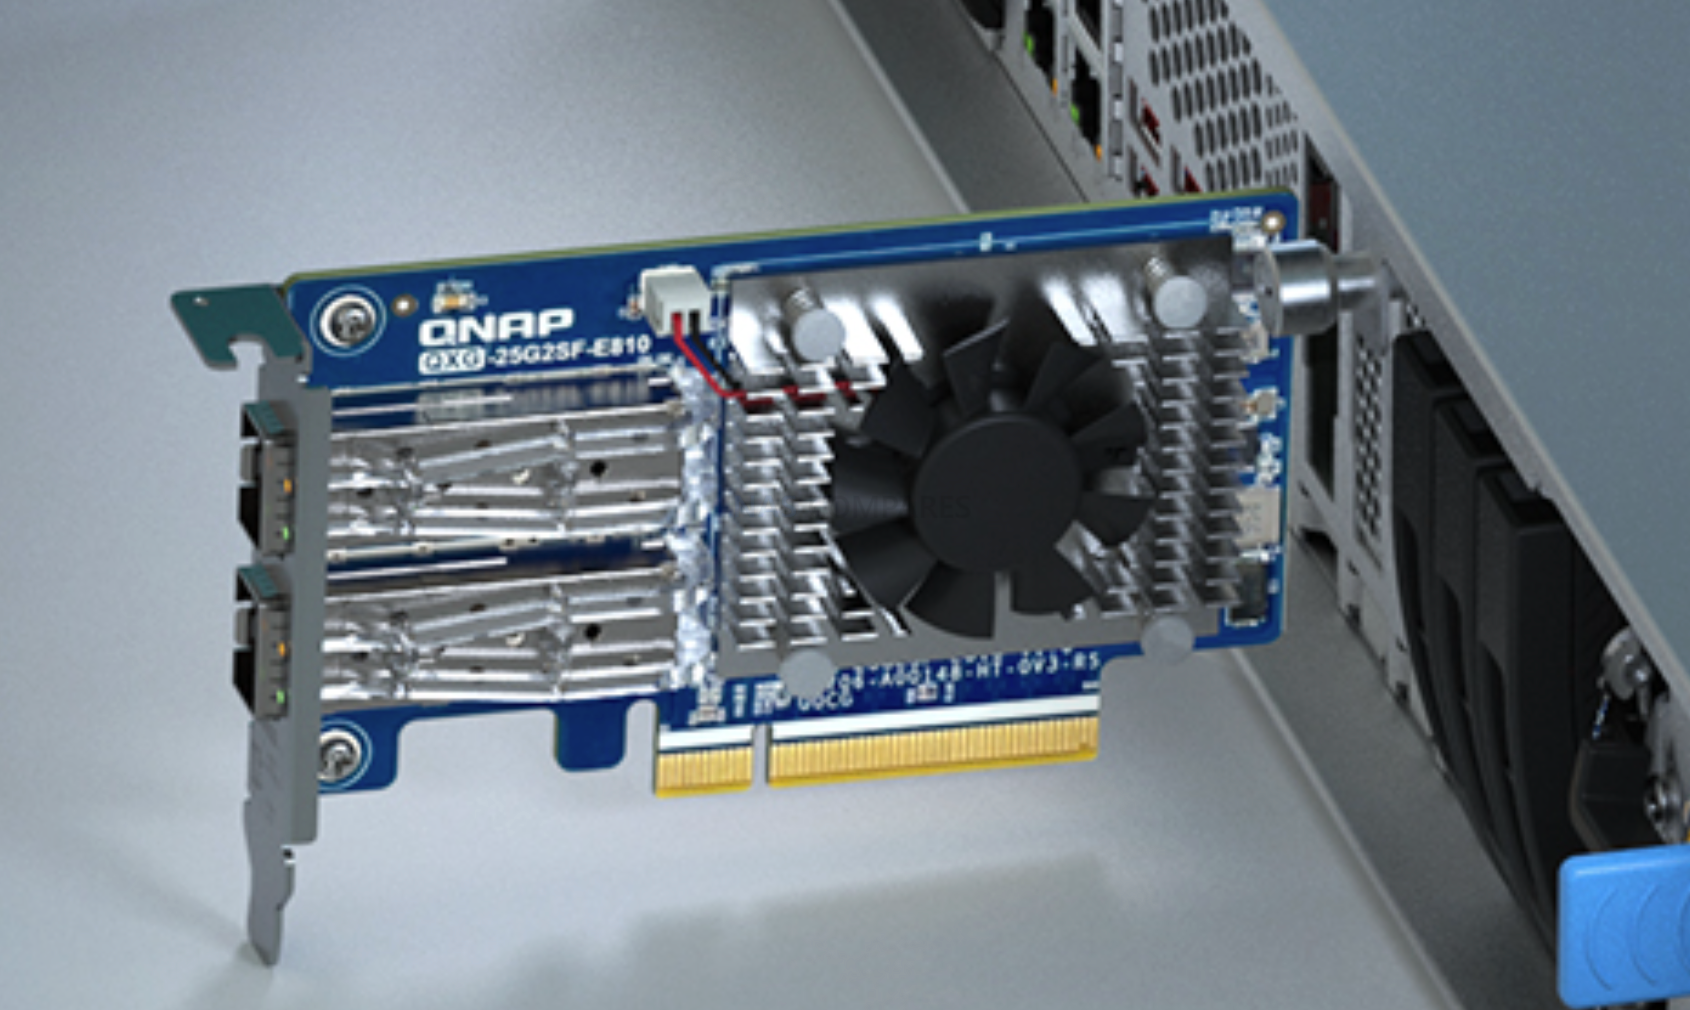 QNAP Unleashes the Power of 25GbE with New Dual-Port Network Expansion Card QXG-25G2SF-E810